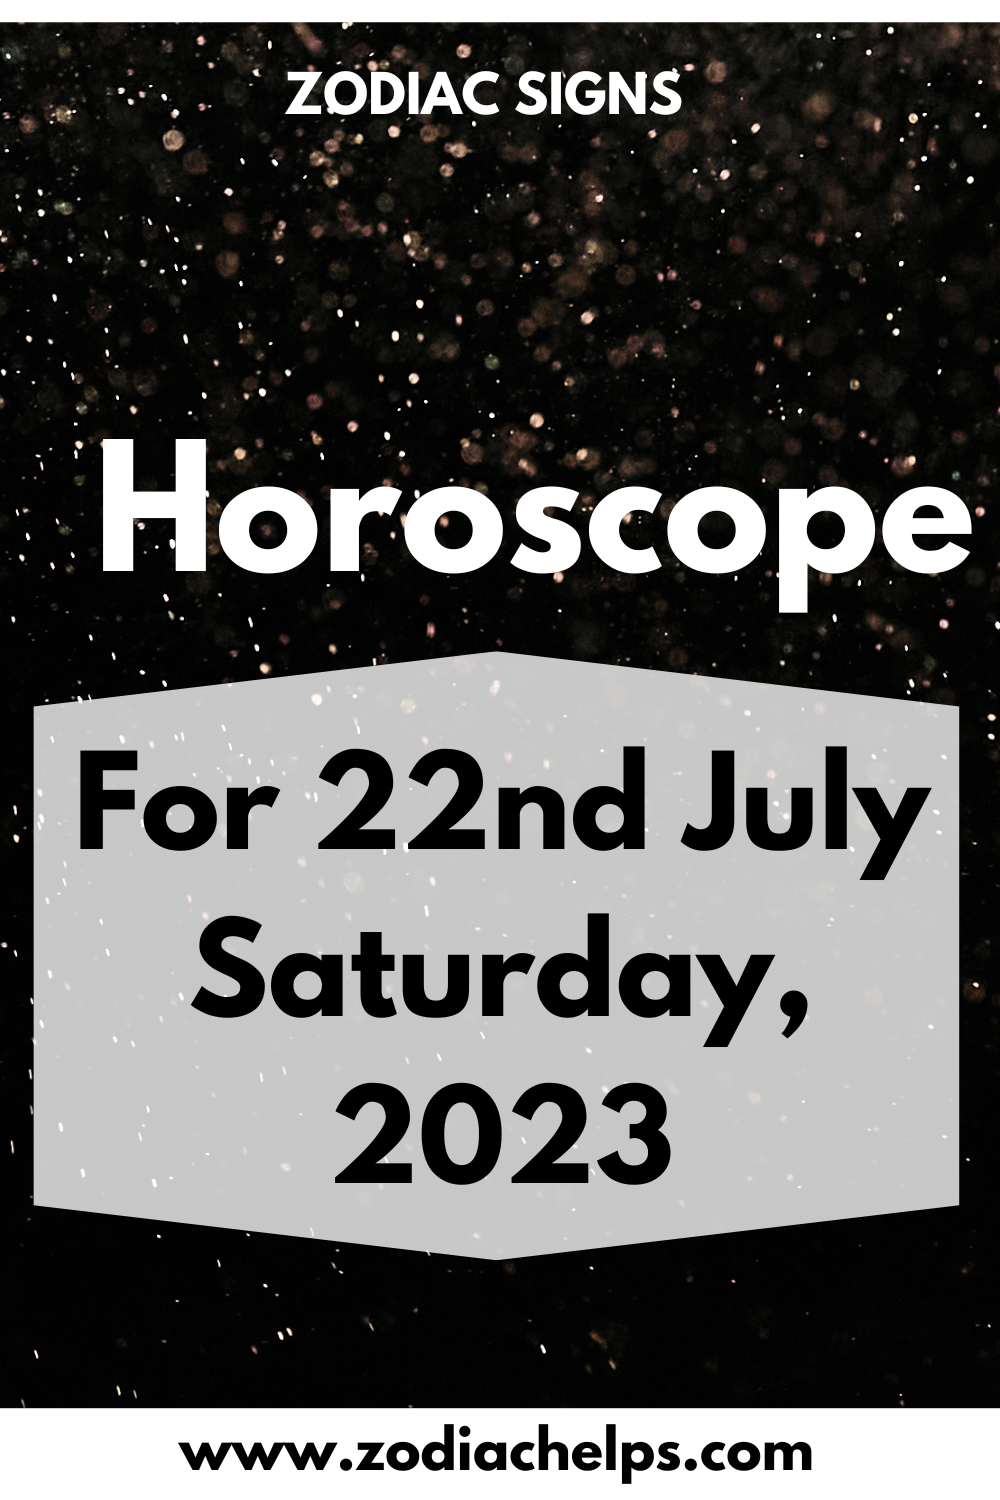 Horoscope for 22nd July Saturday, 2023